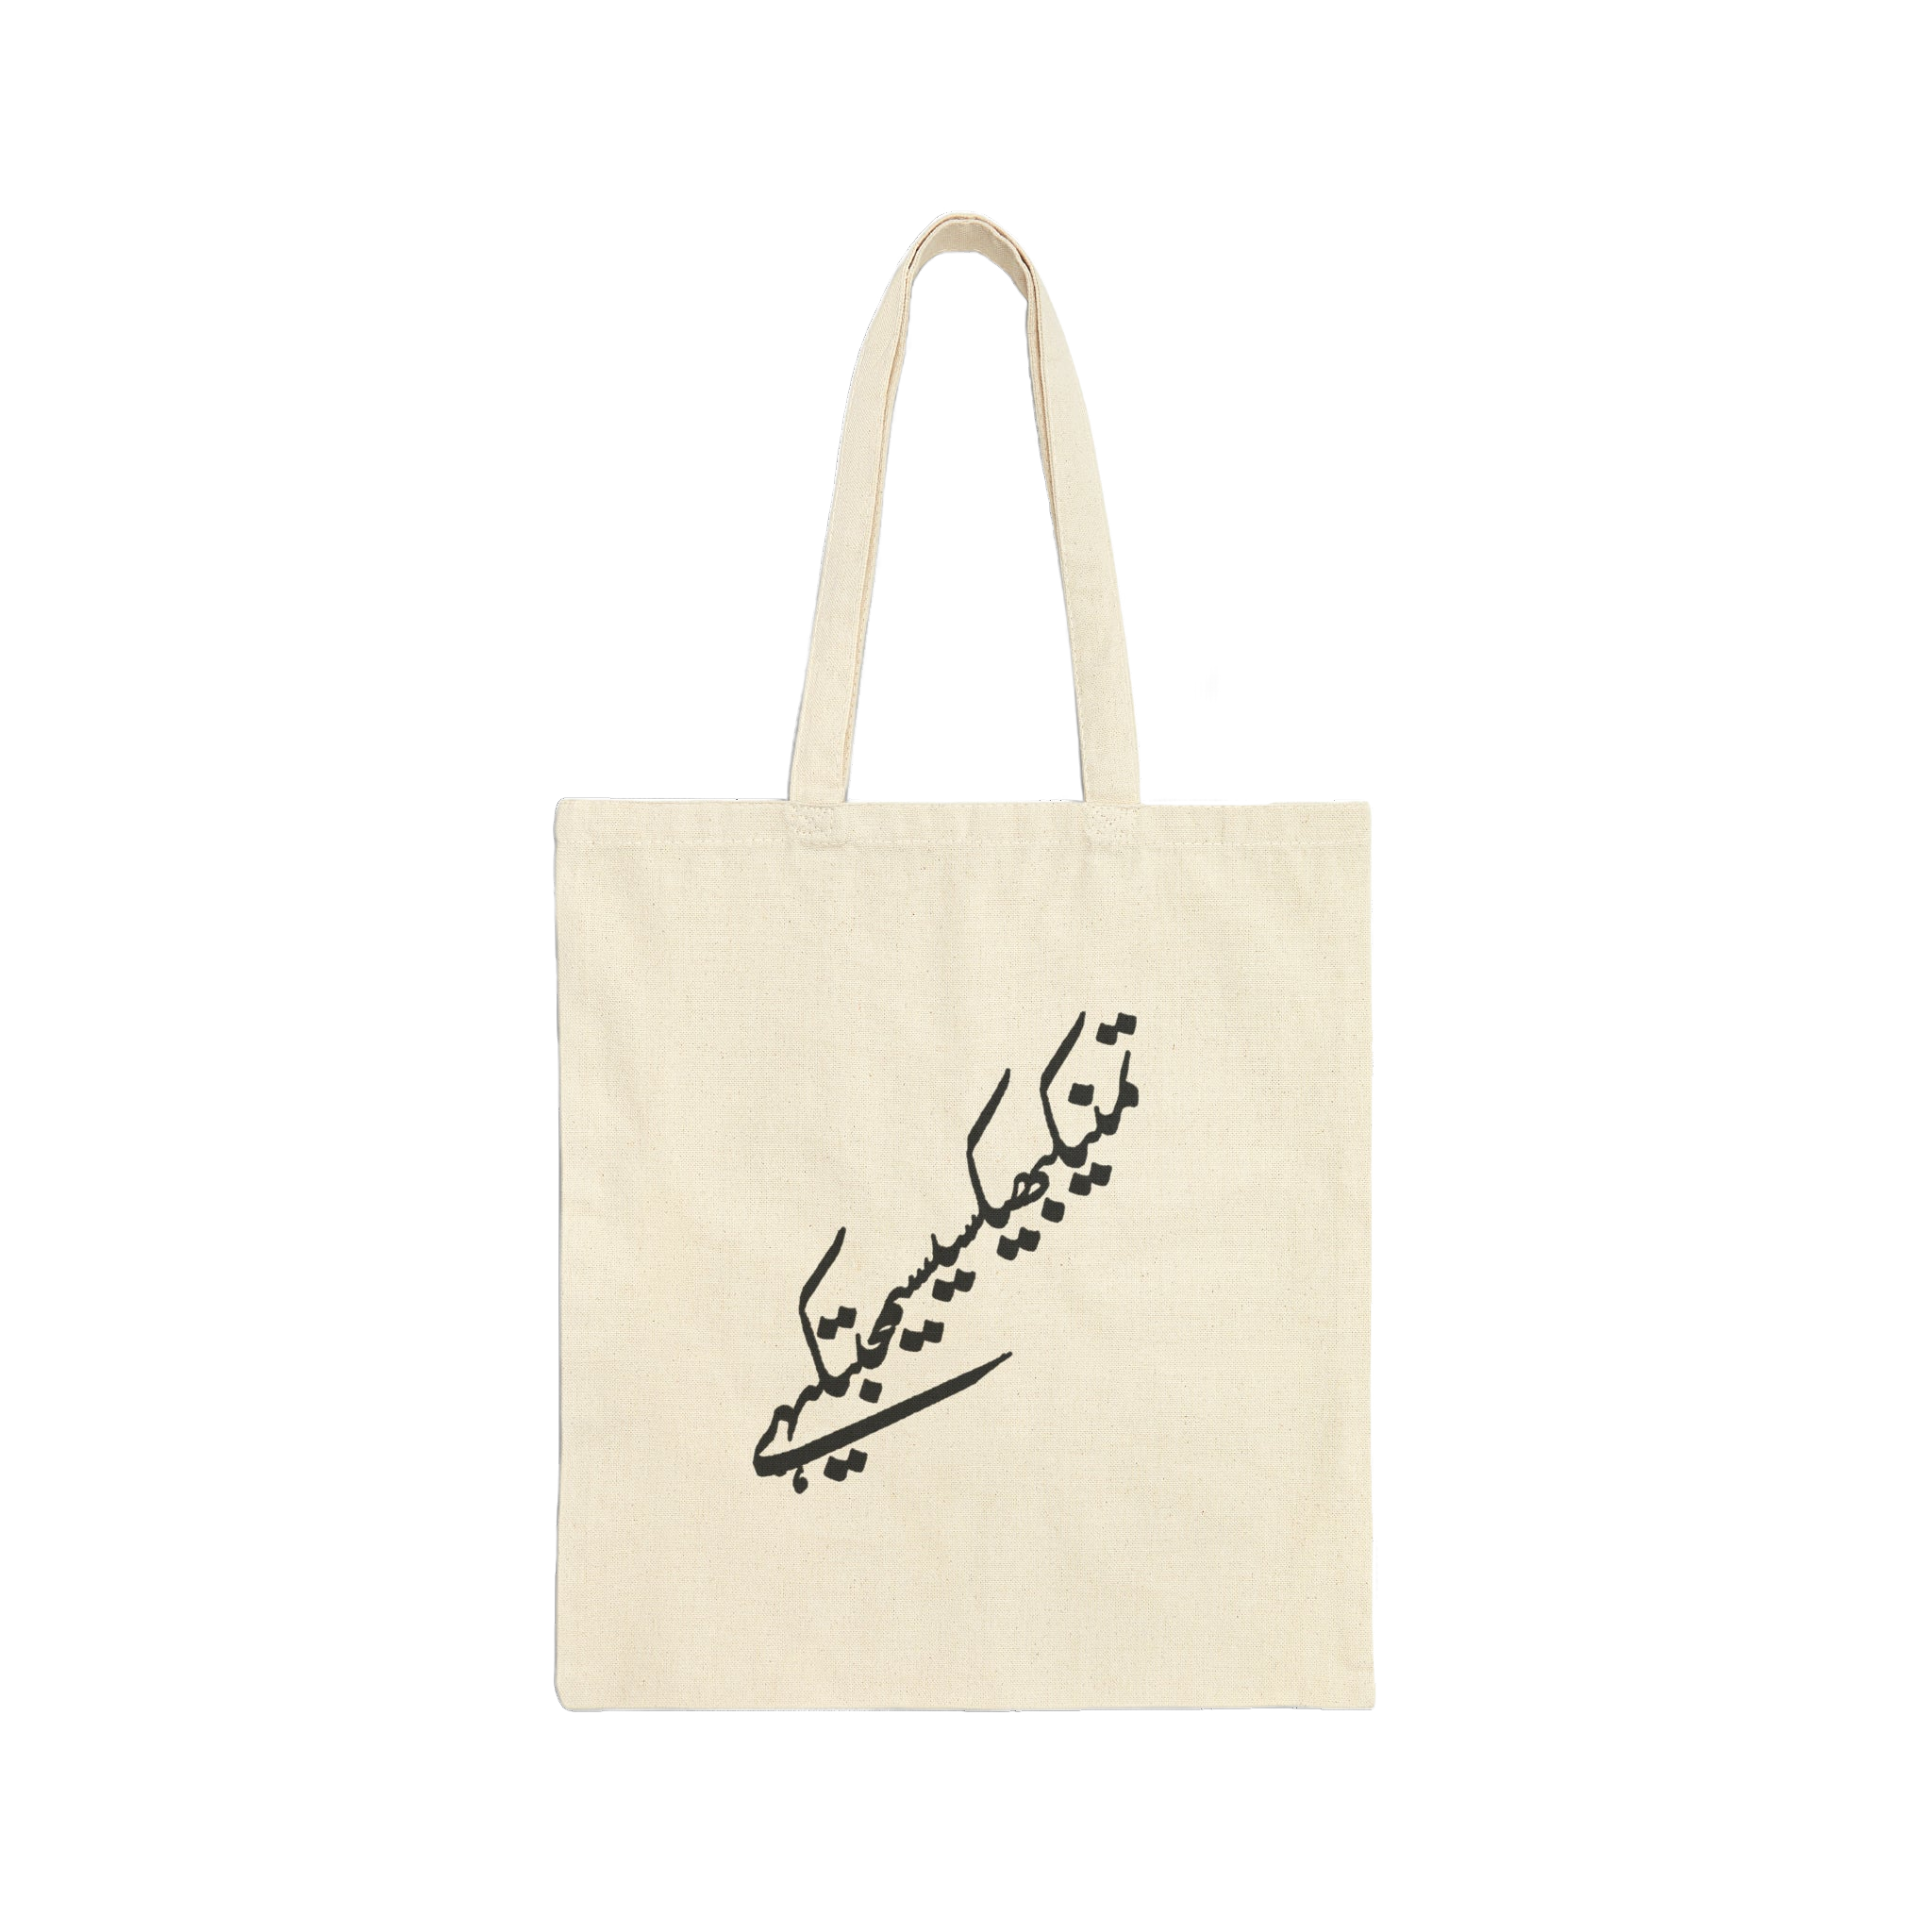 Have you Ever Loved Someone Tote Bag